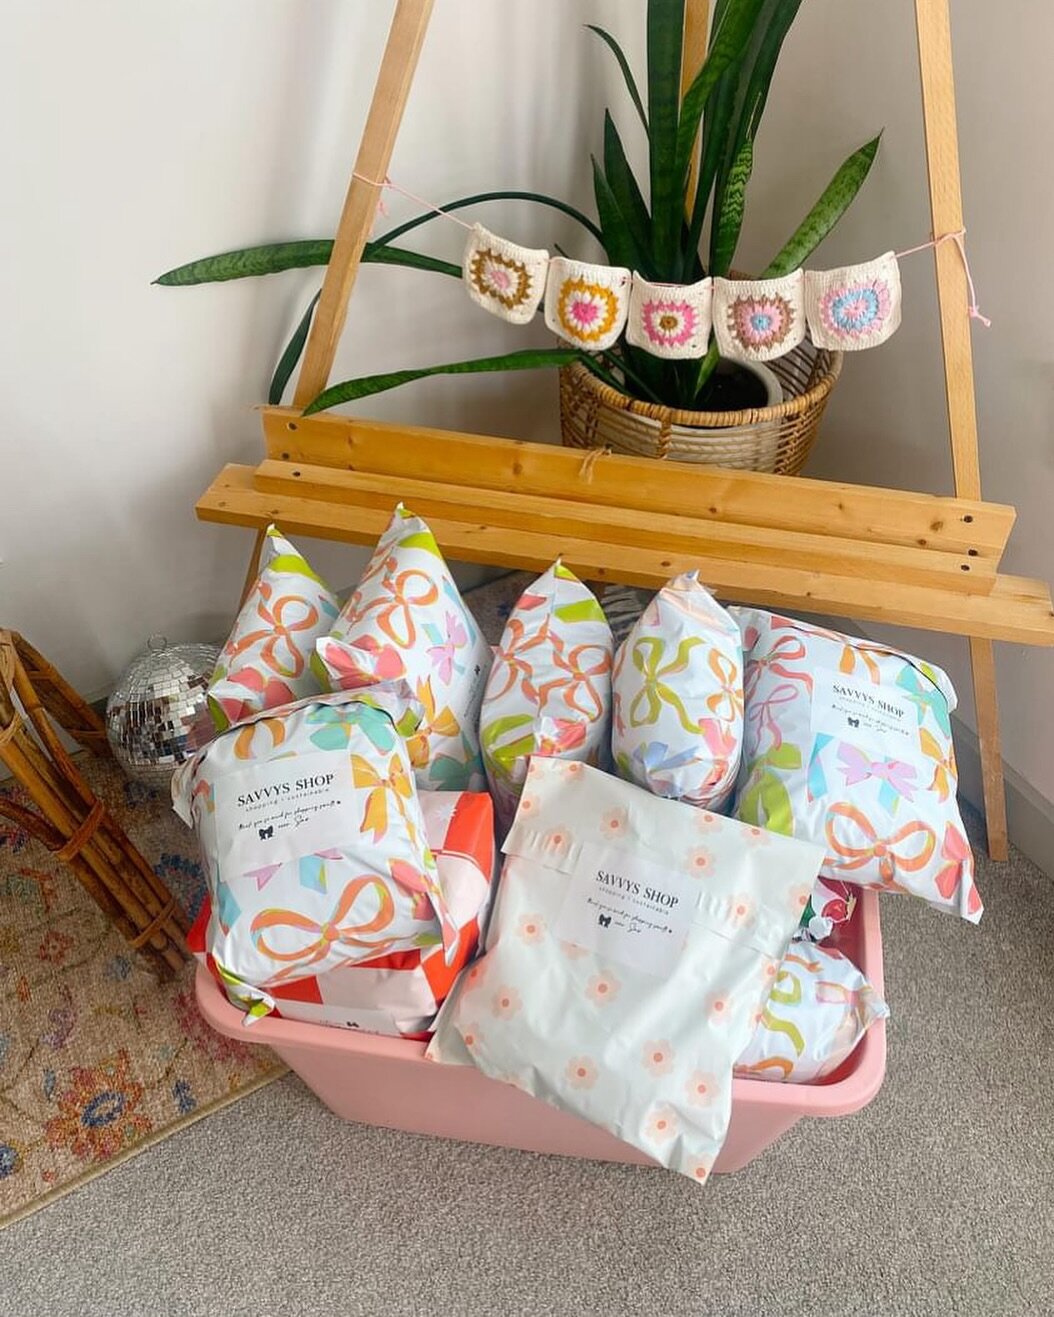 The cutest customer photo by @savvys.shop featuring our Blissful Bows &amp; Dainty Daisy mailers!🎀🌼 

We&rsquo;ve had lots of questions about the bow mailers so wanted to give a little update! They are currently sold out (🤯) but we are working on 